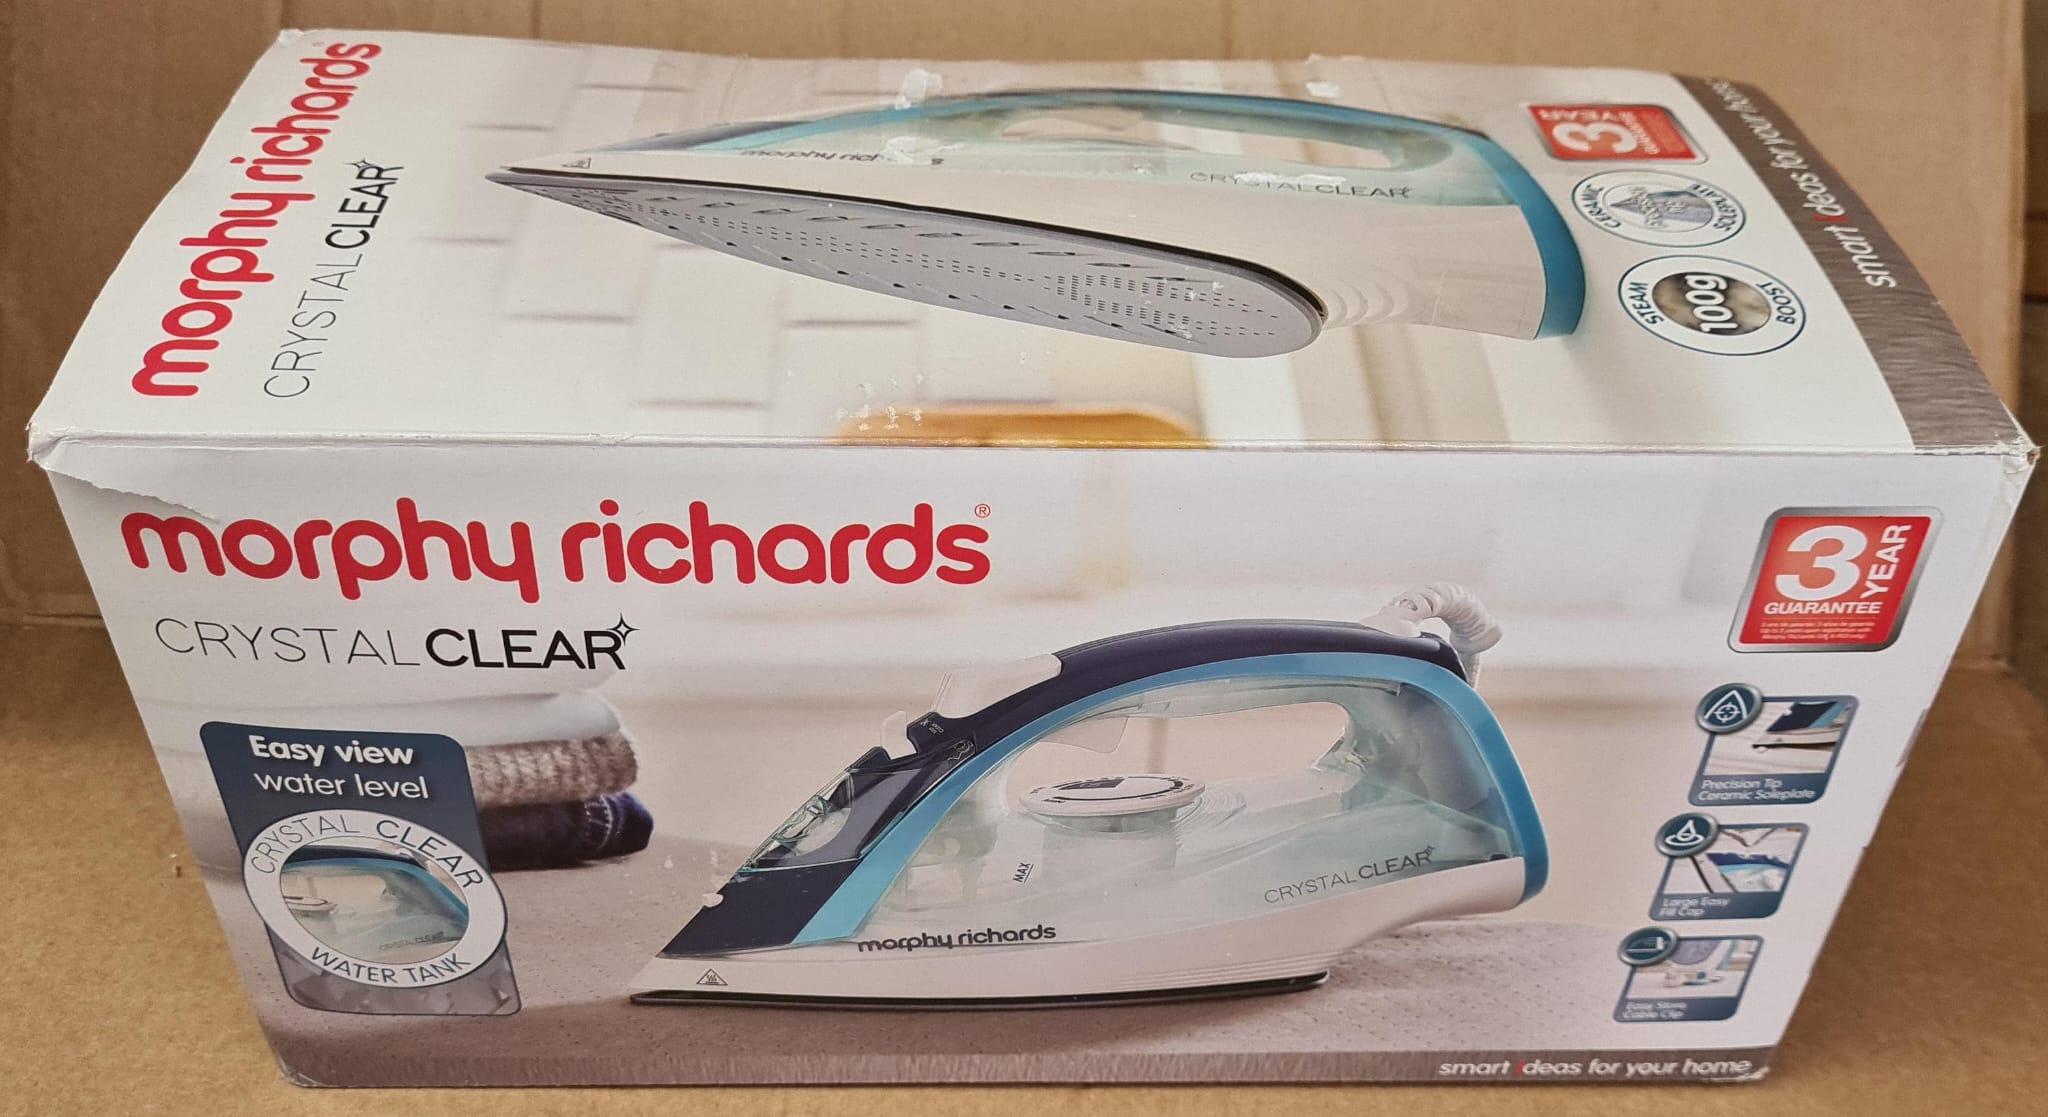 Morphy Richards 300300 Steam Iron Crystal Clear Turquoise / White 2400 W-9023U